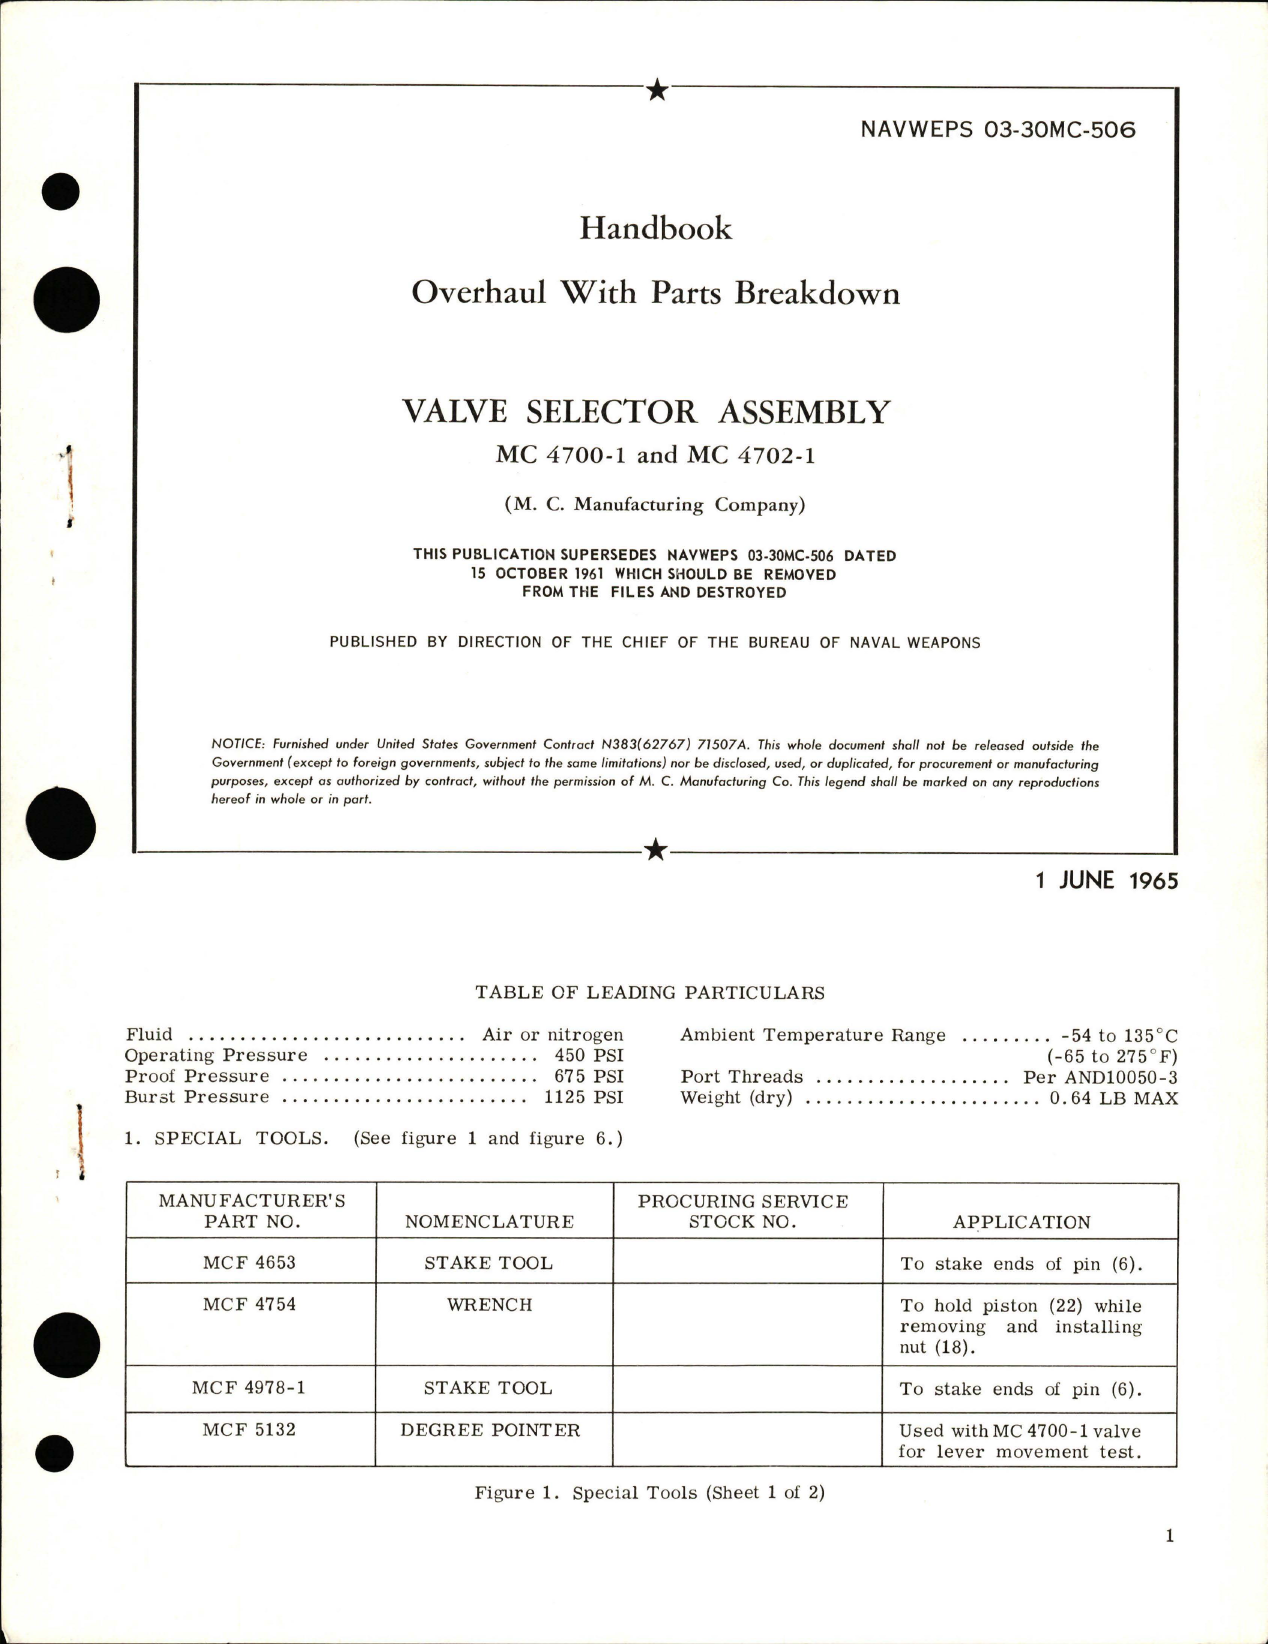 Sample page 1 from AirCorps Library document: Overhaul with Parts Breakdown for Valve Selector Assembly - MC 4700-1 and MC 4702-1